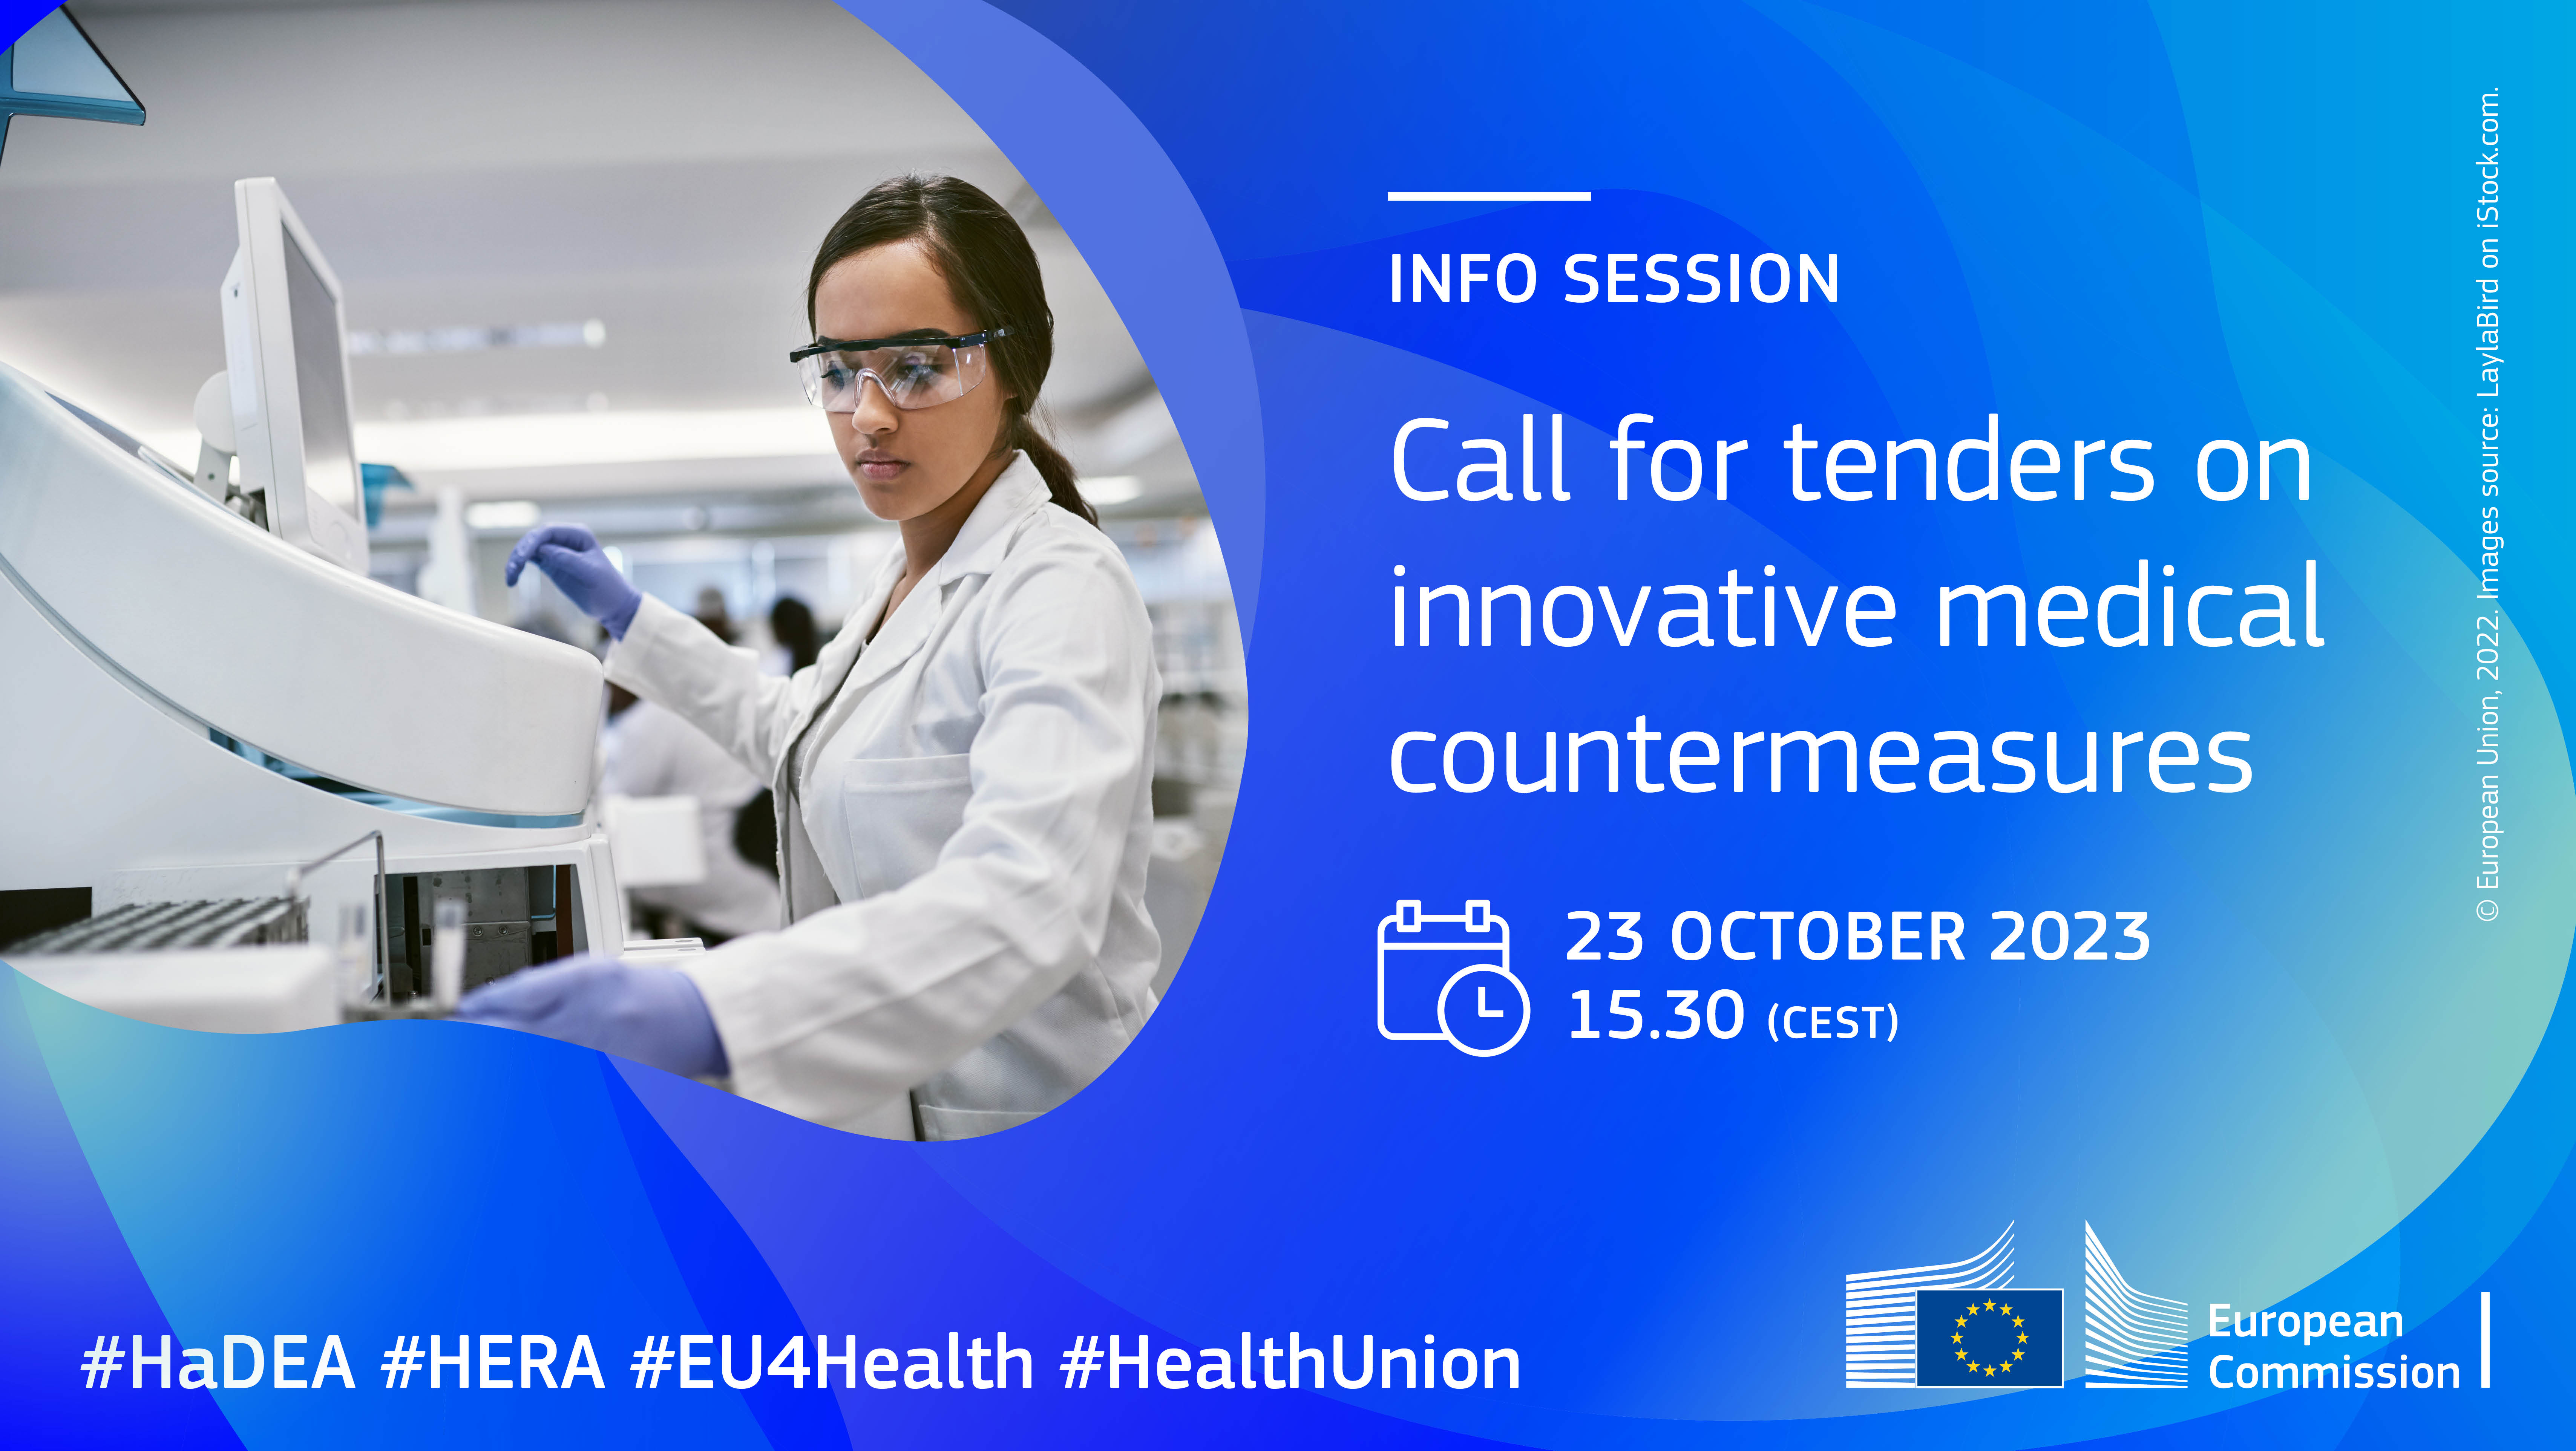 Info session - EU4Health call for tenders on innovative medical countermeasures